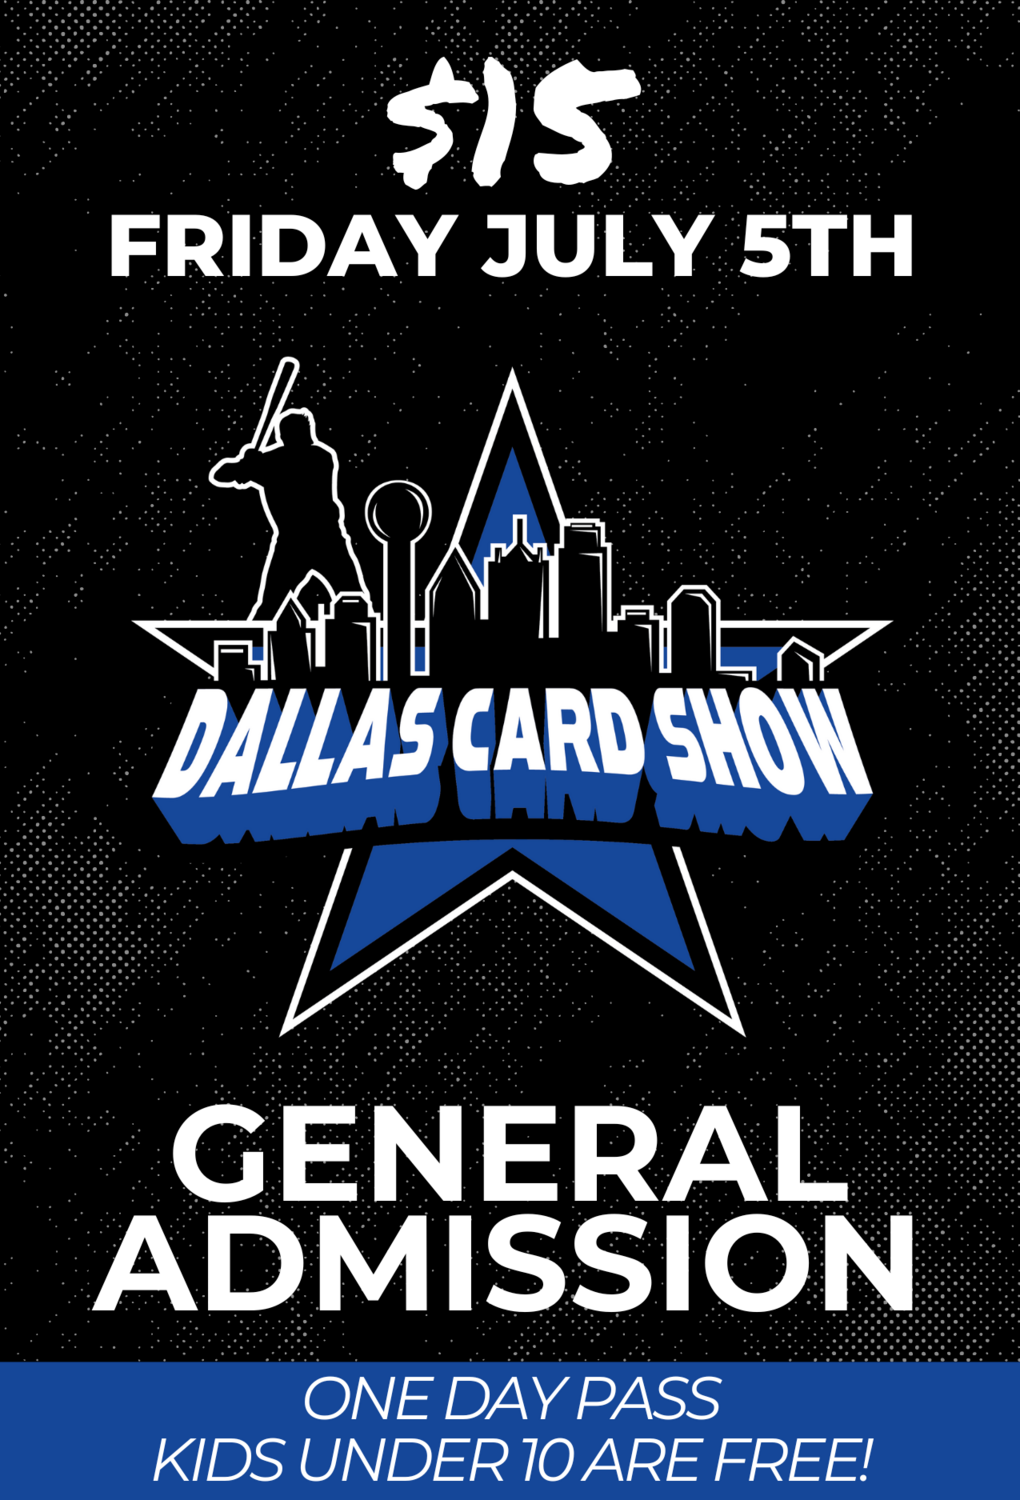 Friday July 5th - General Admission